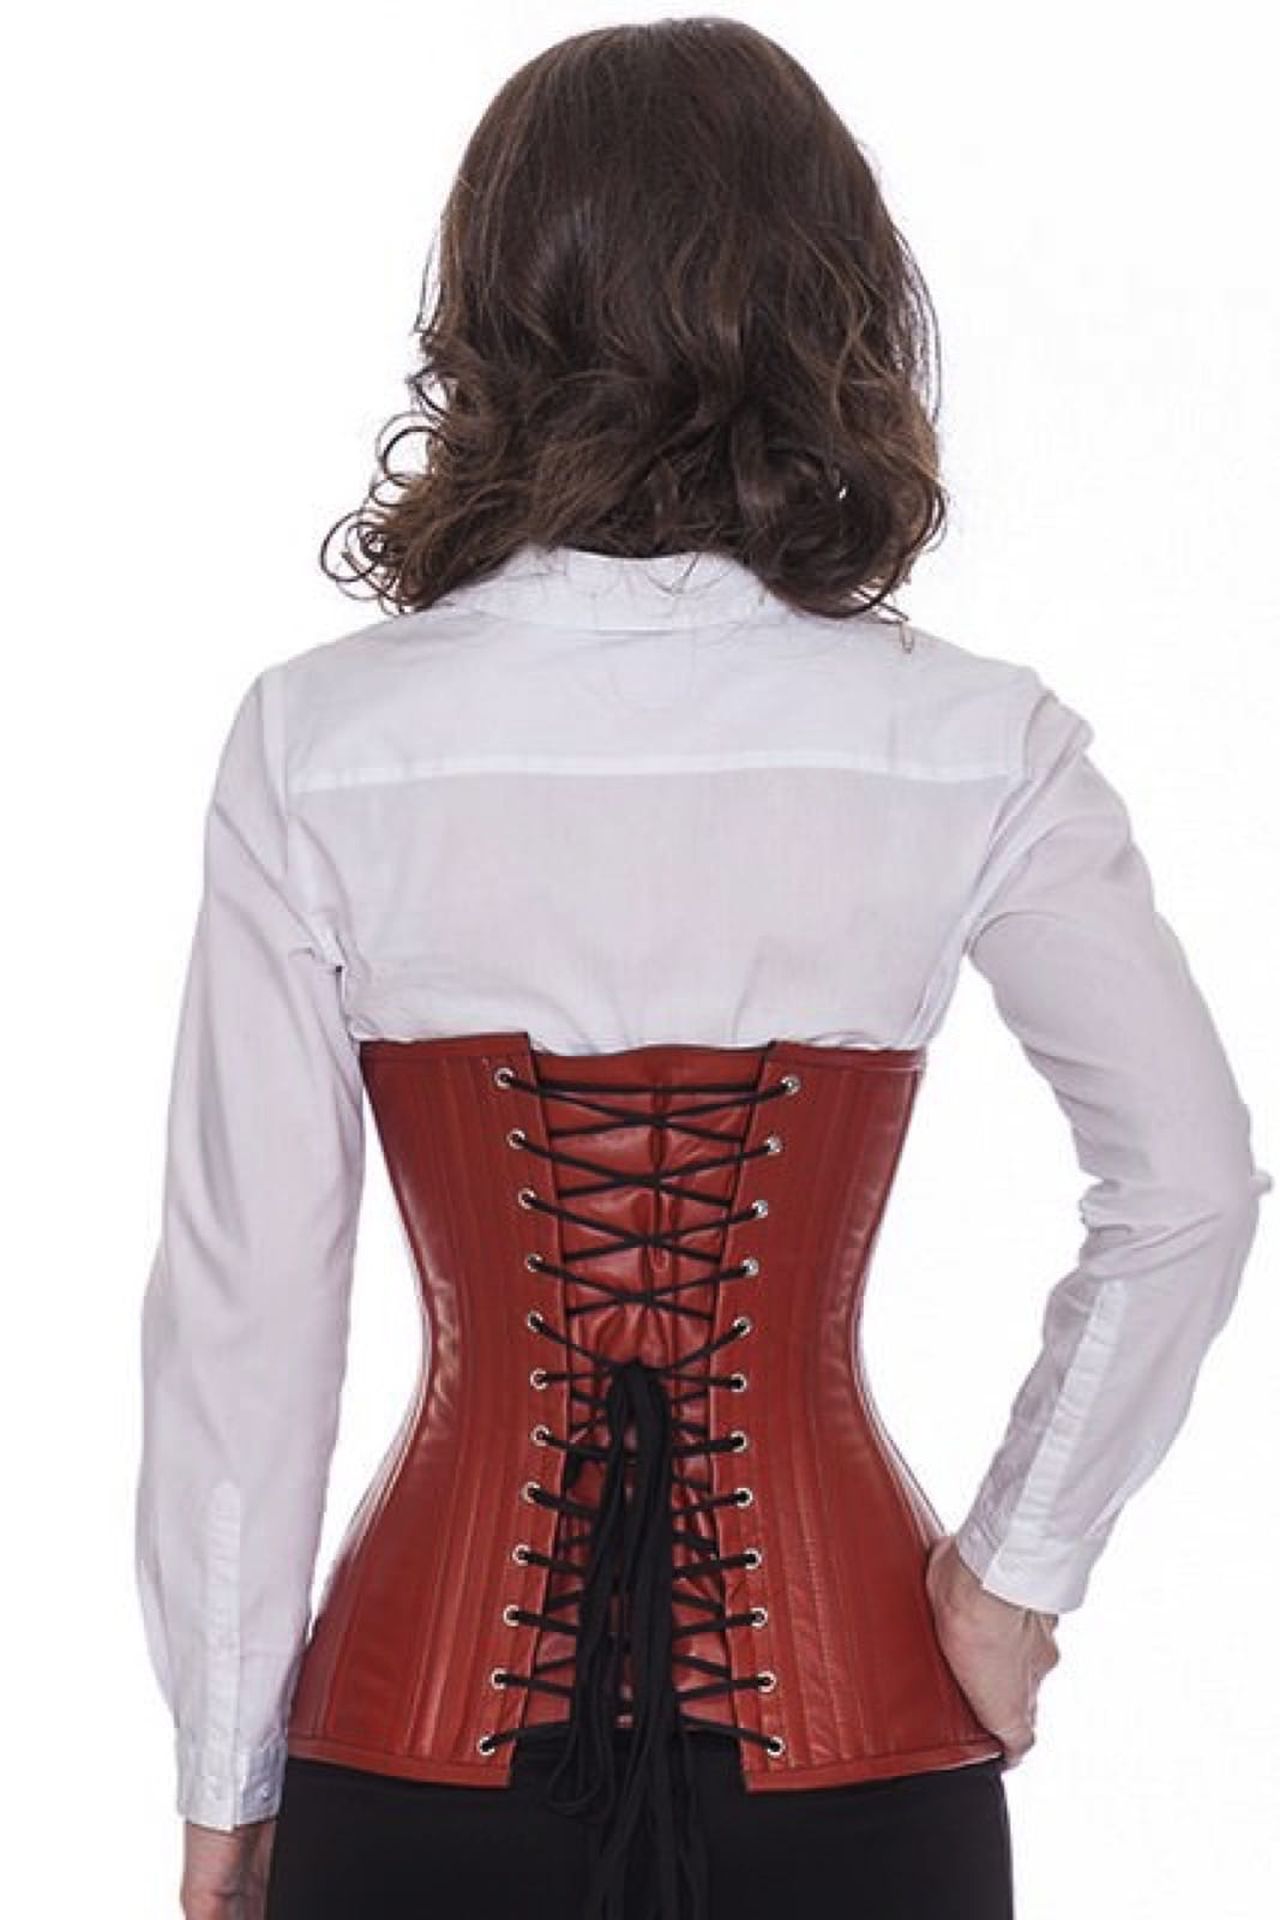 Corset light brown leather curved underbust ln27